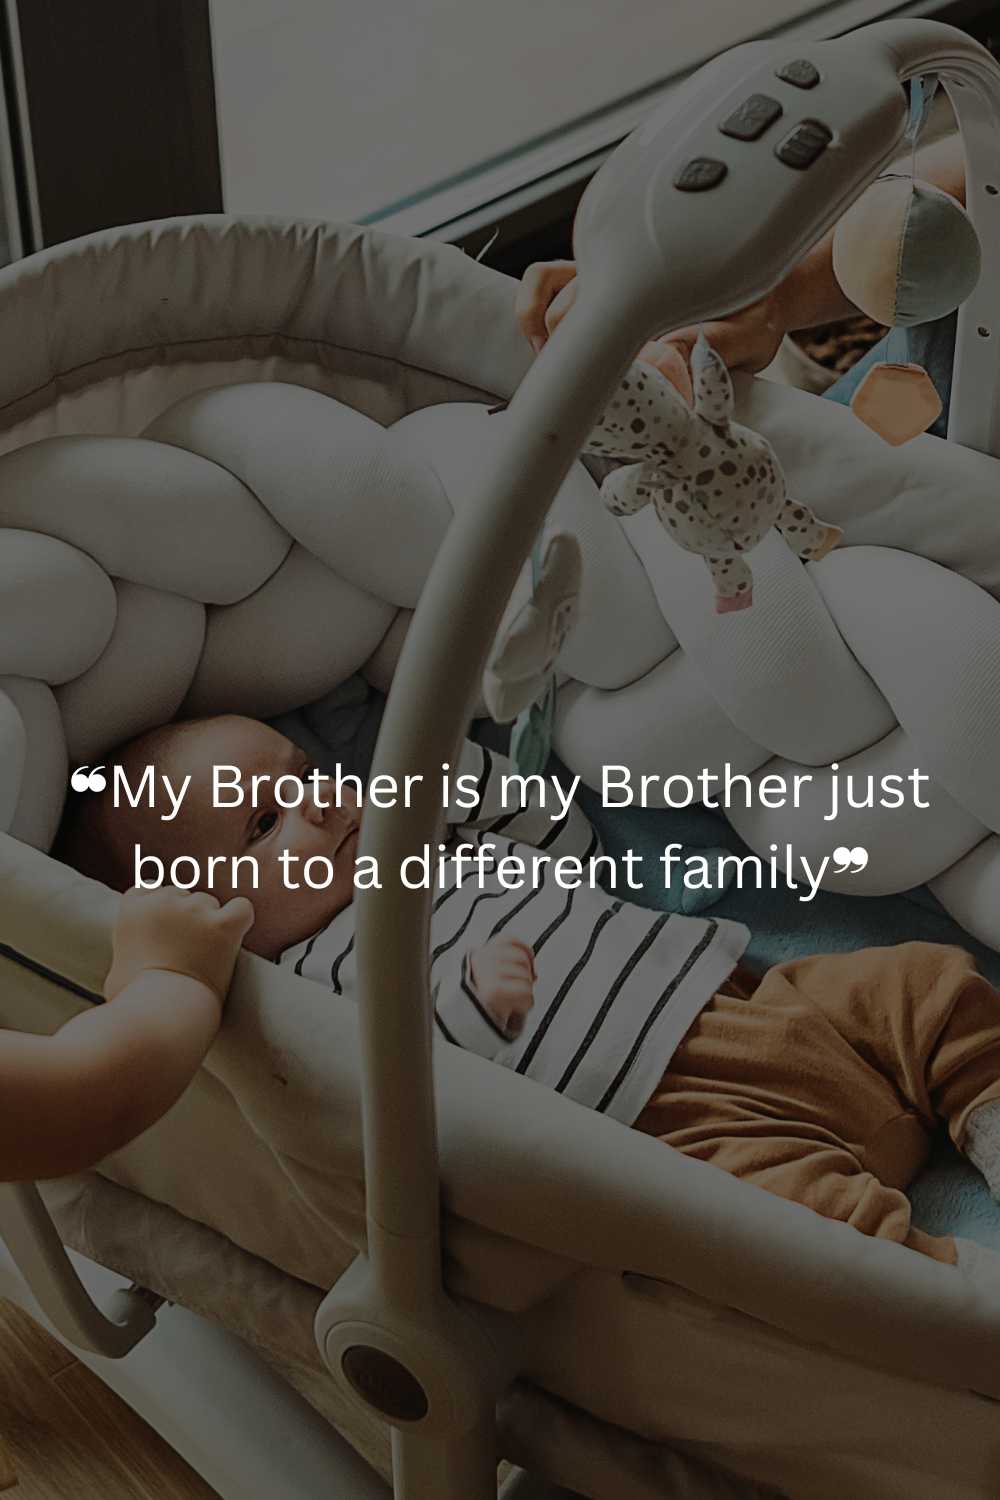 ❝My Brother is my Brother just born to a different family❞